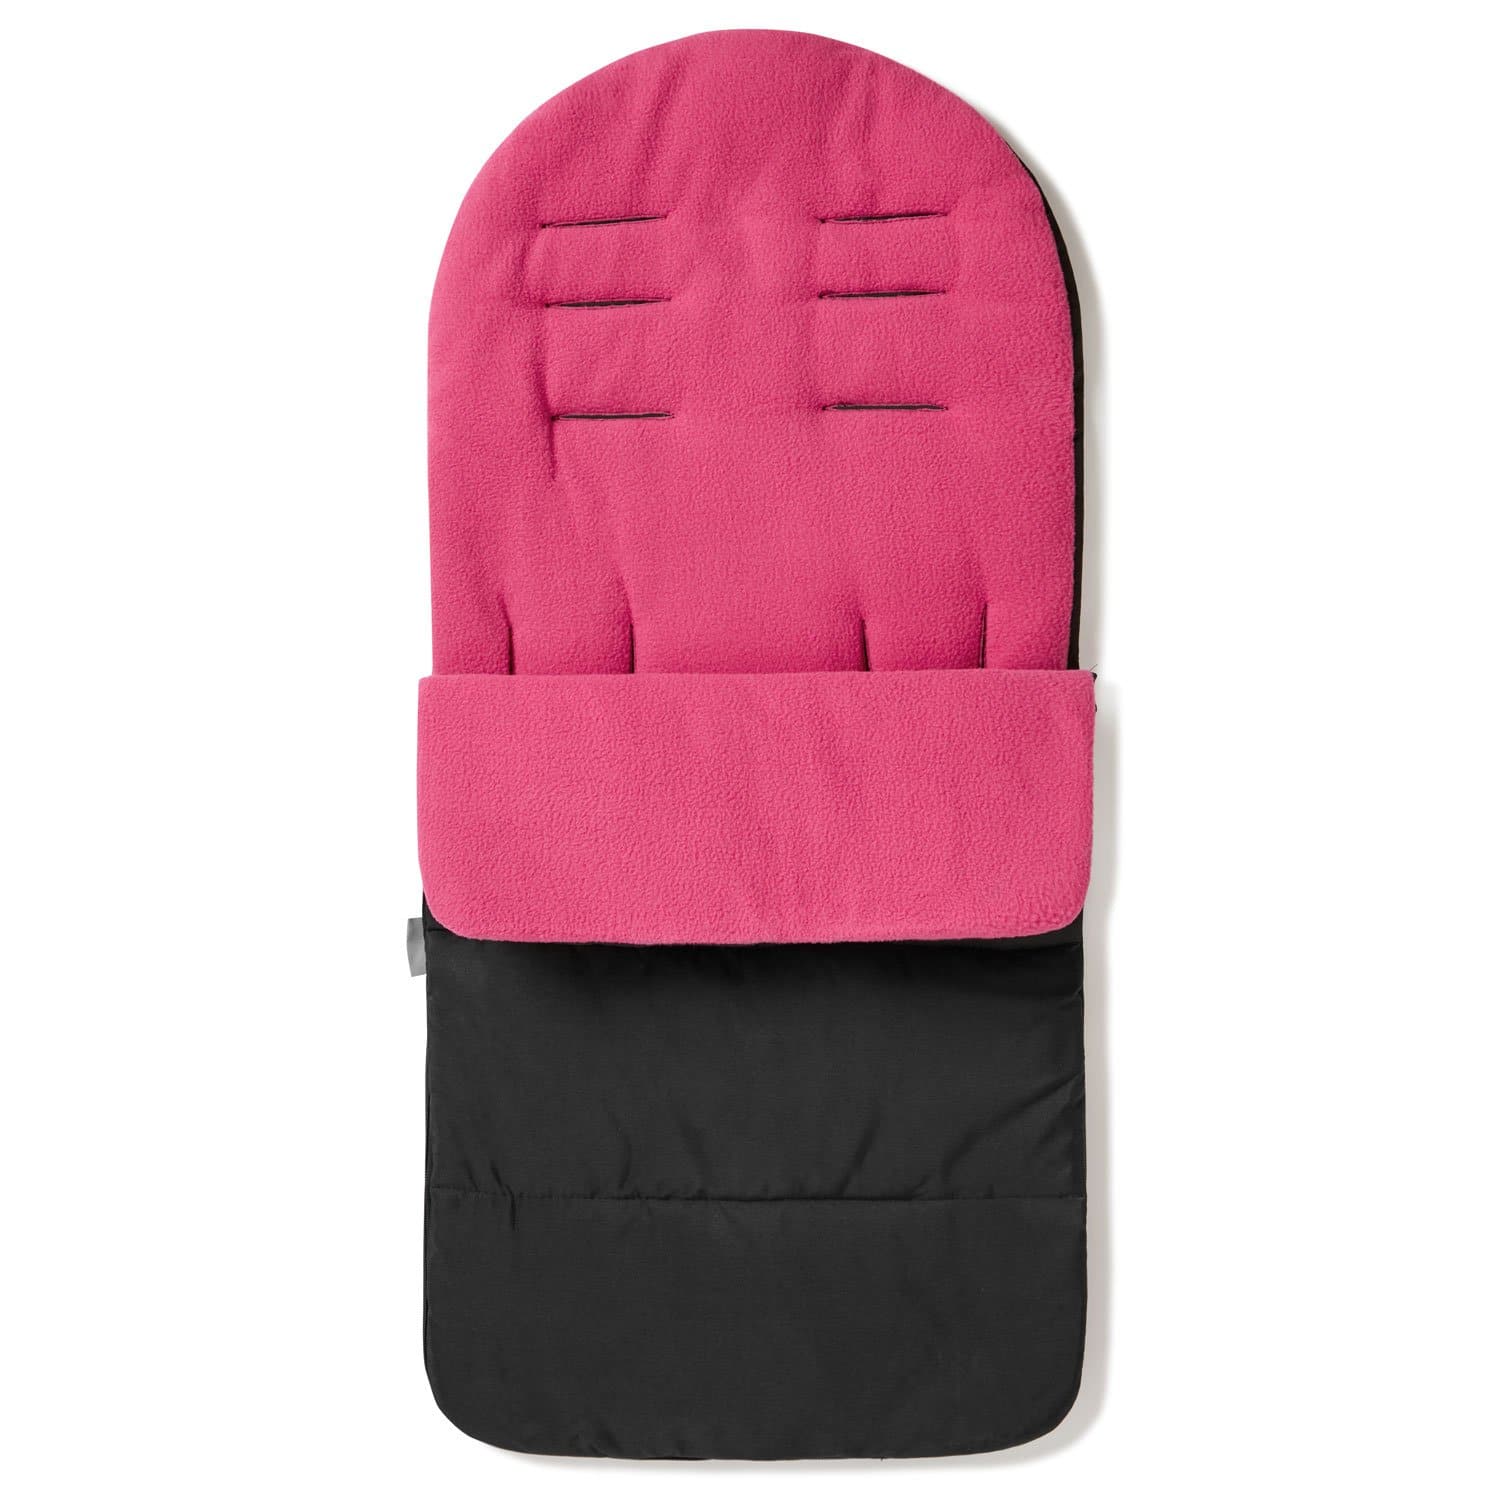 Premium Footmuff / Cosy Toes Compatible with Bebecar - Pink Rose / Fits All Models | For Your Little One